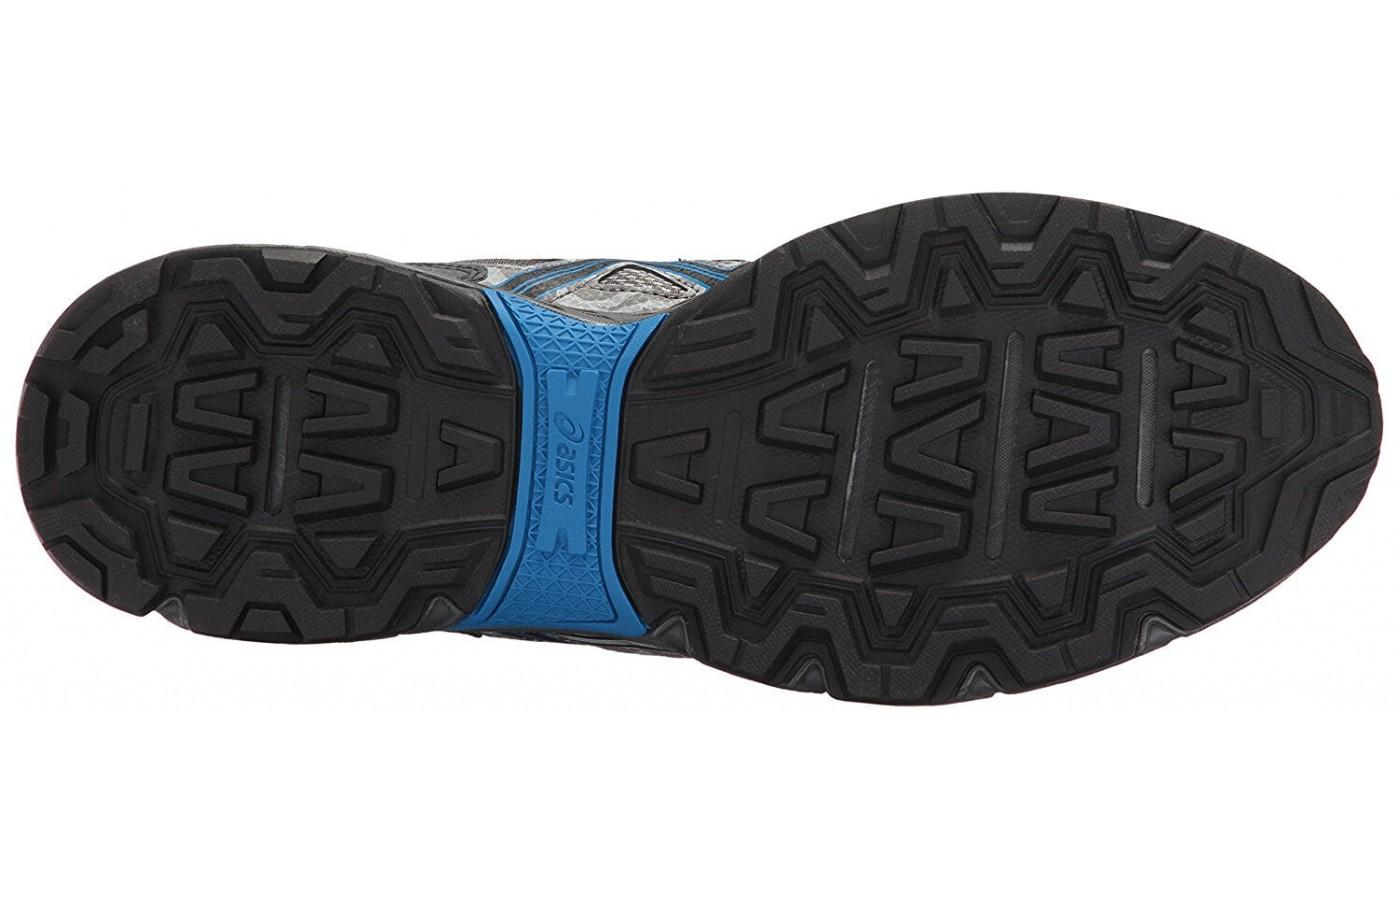 Asics Gel Venture 6 has a tread that can stand up to the trails